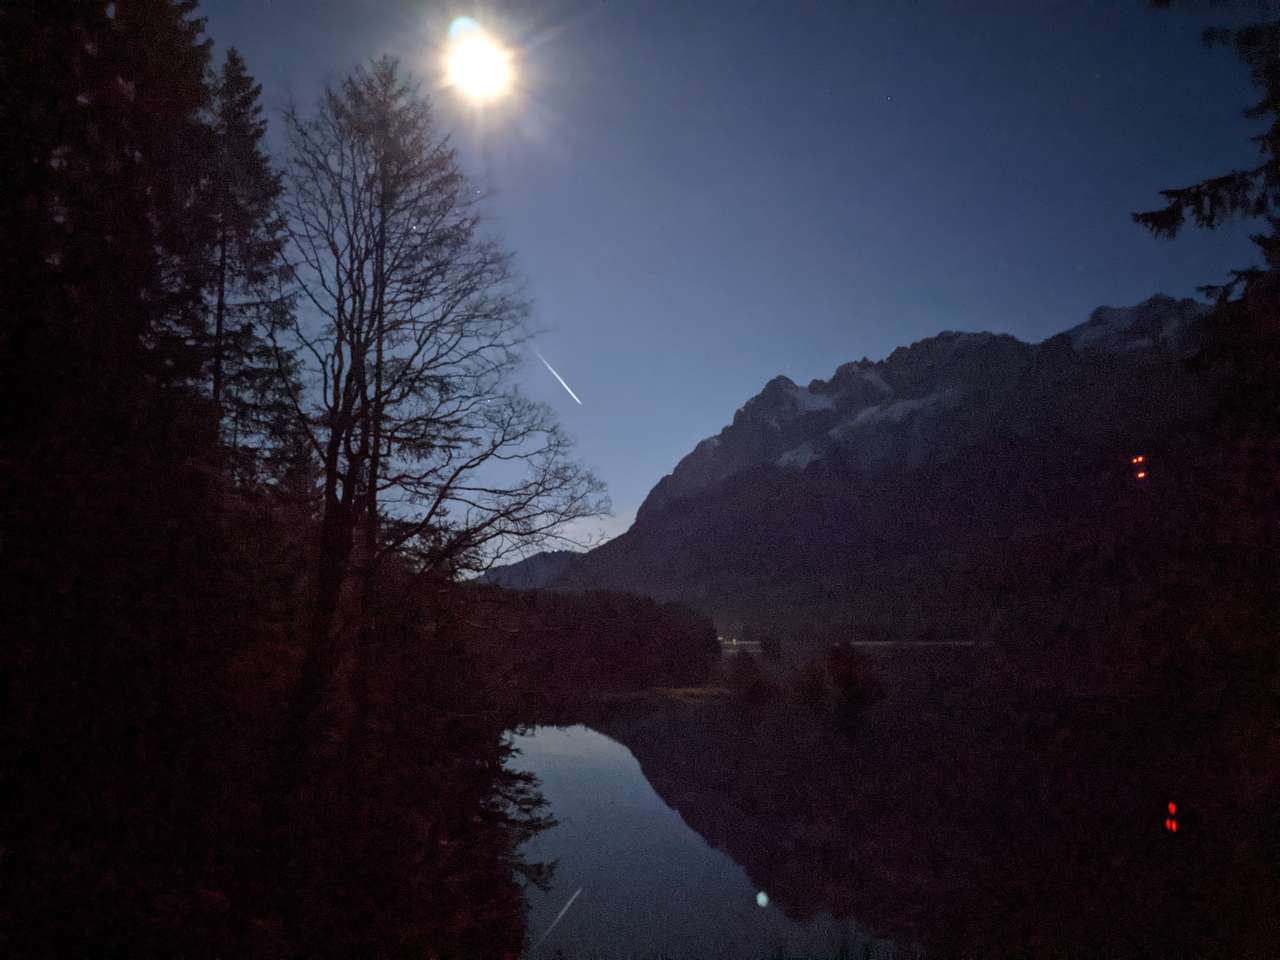 Night Lake puzzle online from photo